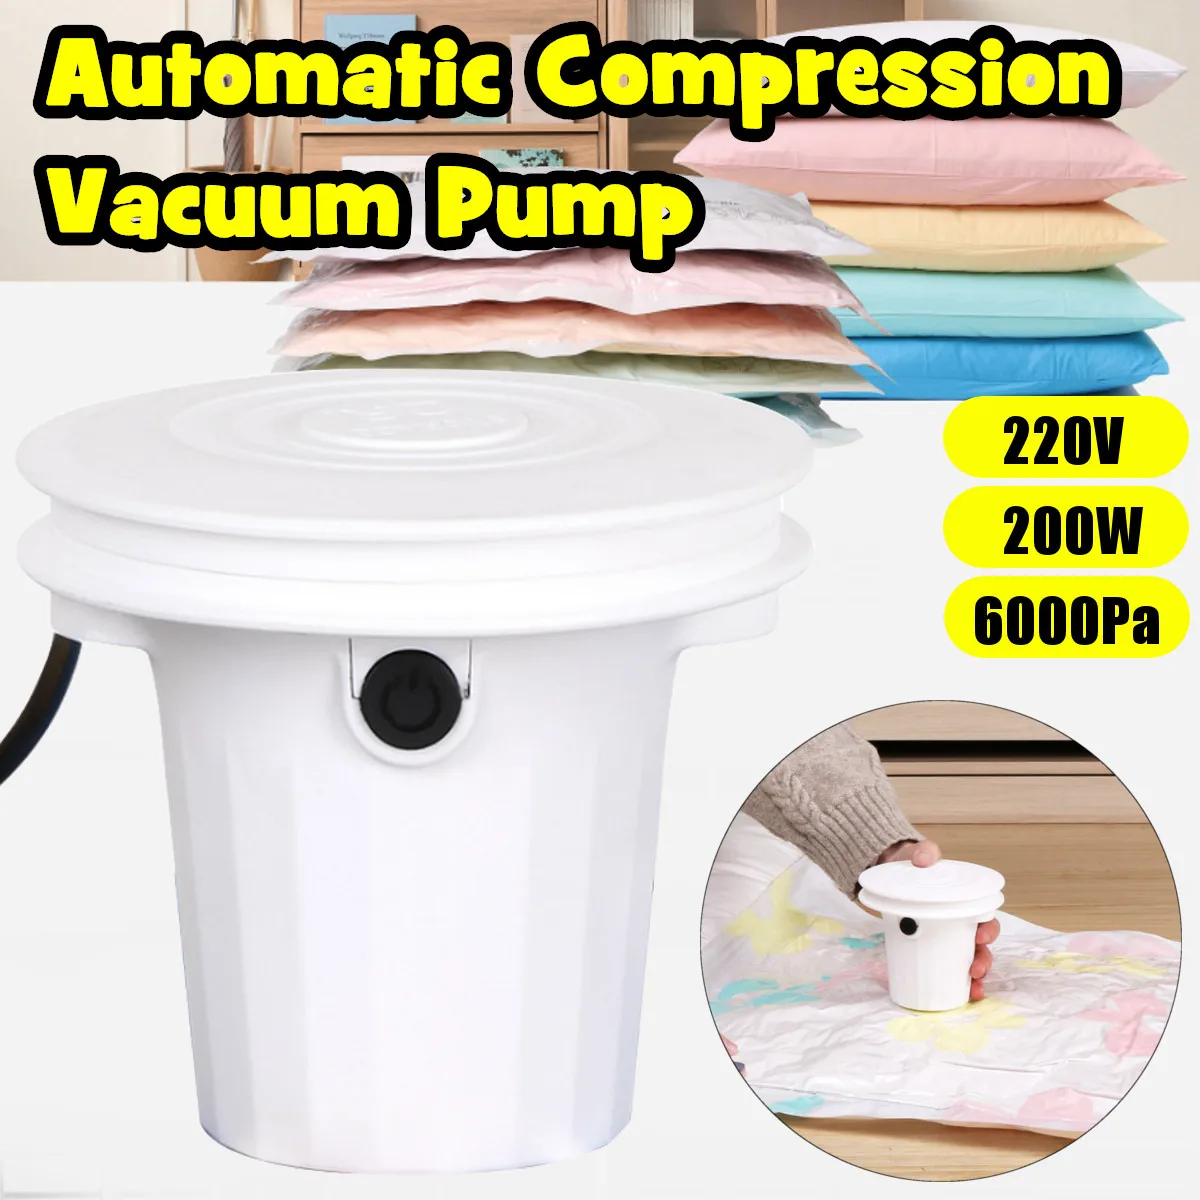 Household Automatic Vacuum Sealer Pump Machine Compressed Bags Vacuum Compressed Bags Electric Air Pump For Clothes Quilt Food